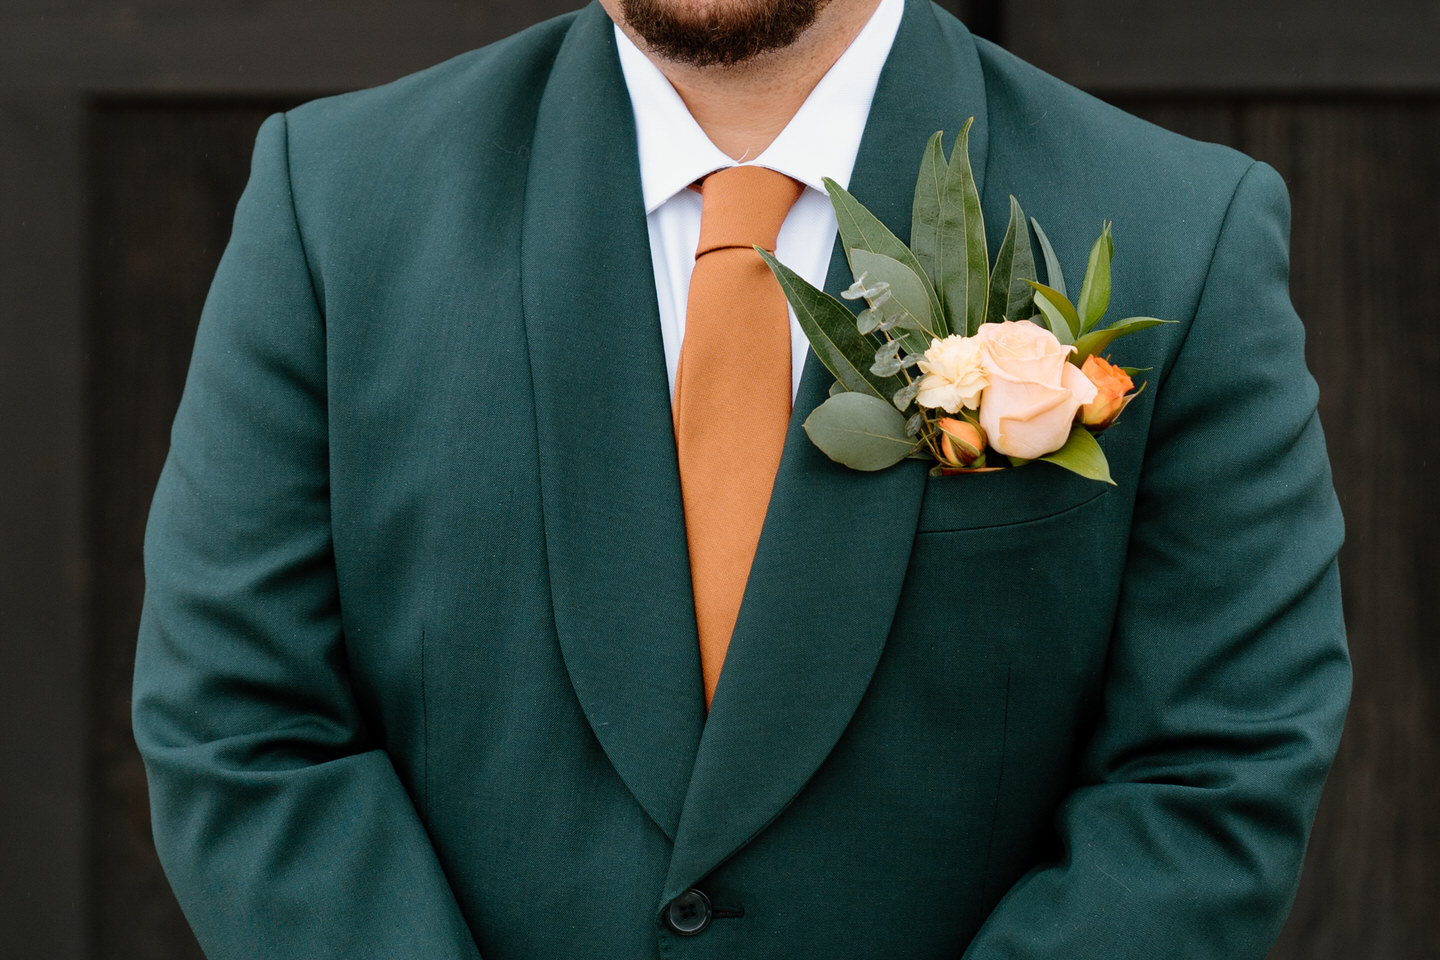 Fall groom attire, suit, tie, and boutonniere